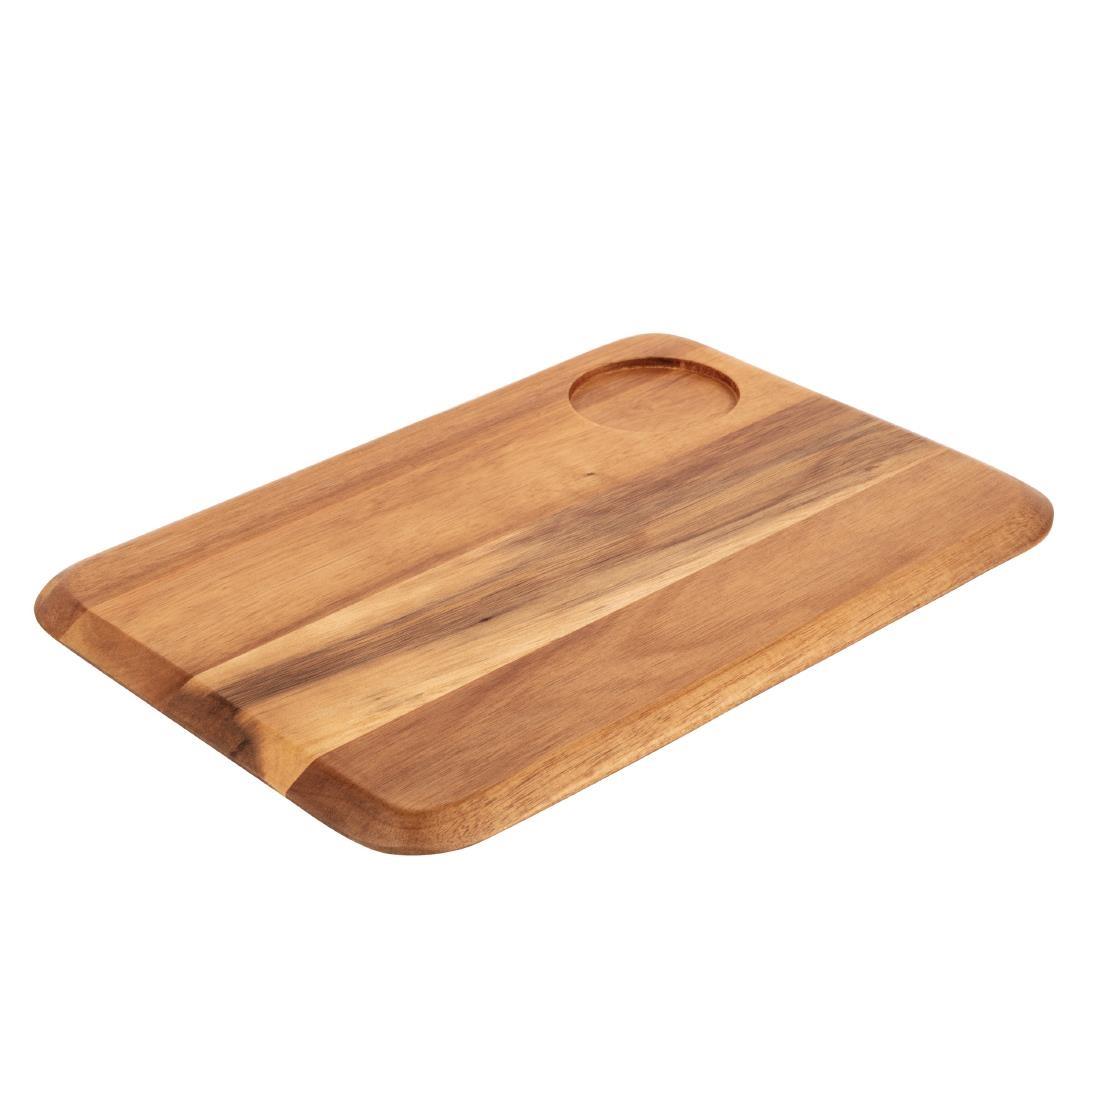 Rounded Acacia Wooden Serving Board - DP156  - 1